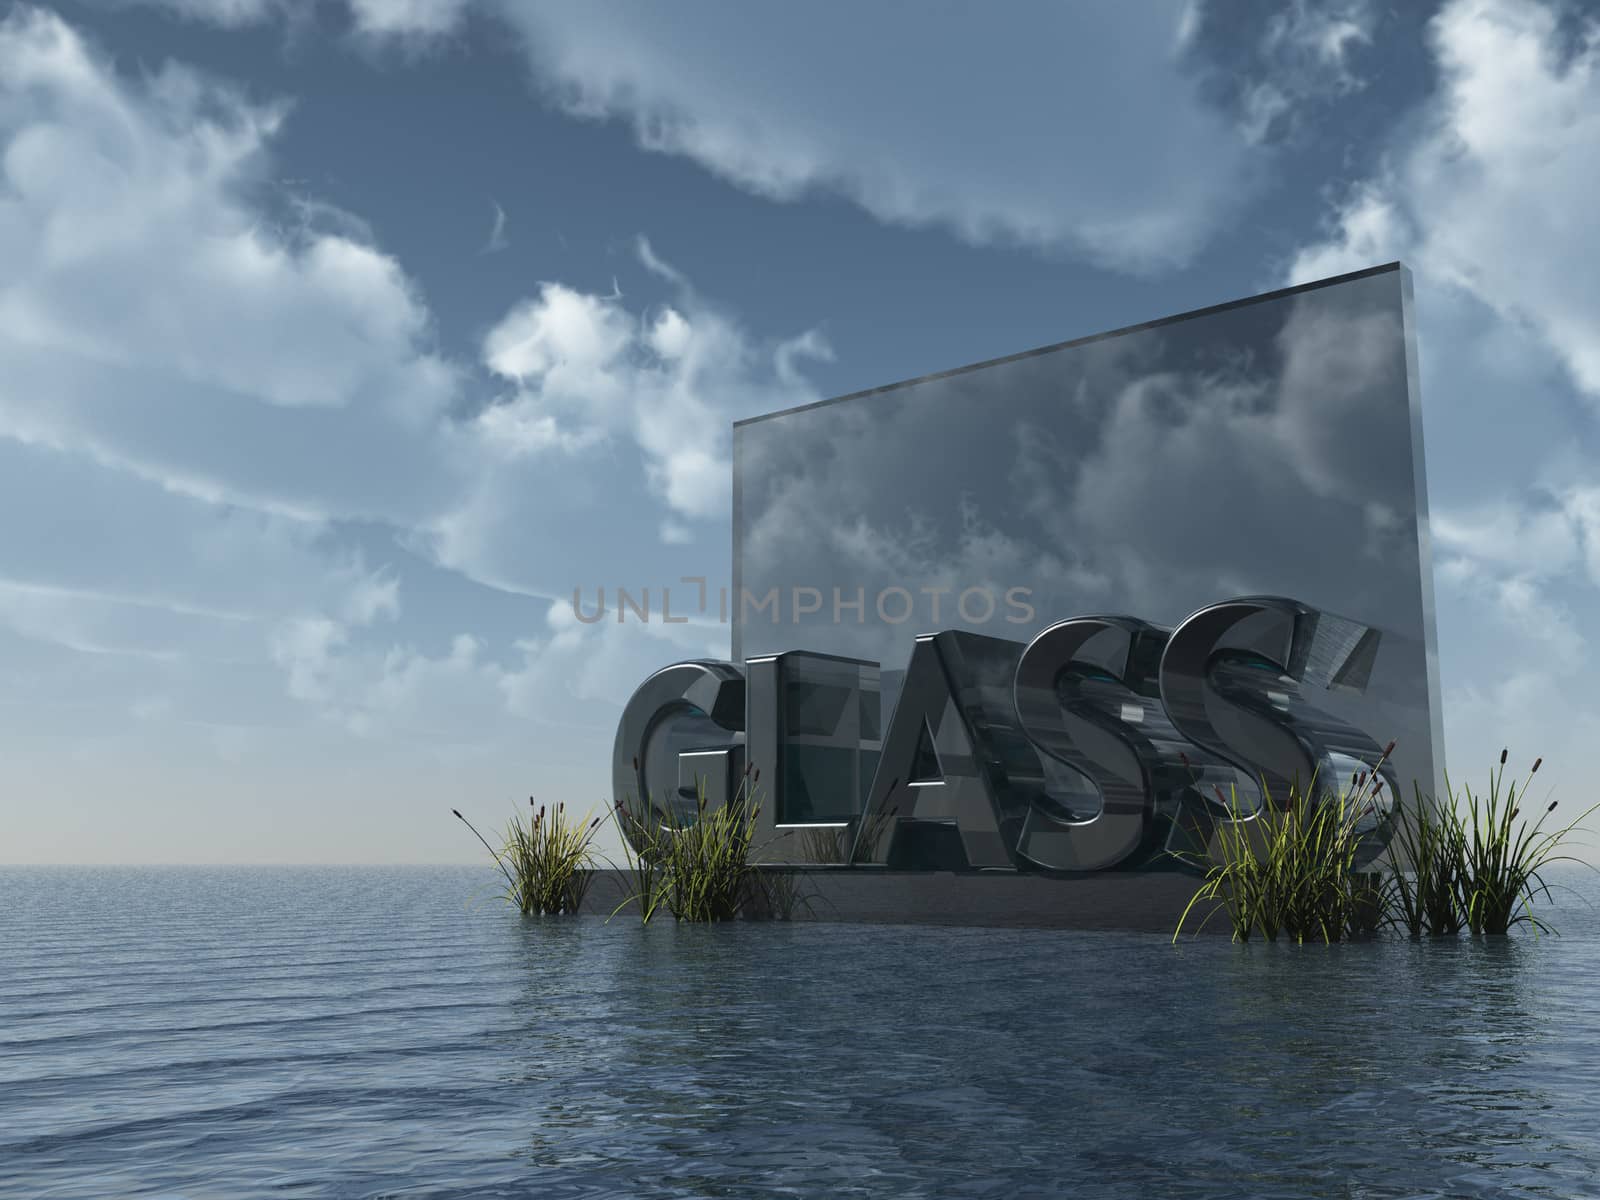 the word glass in glass at water and blue cloudy sky - 3d illustration